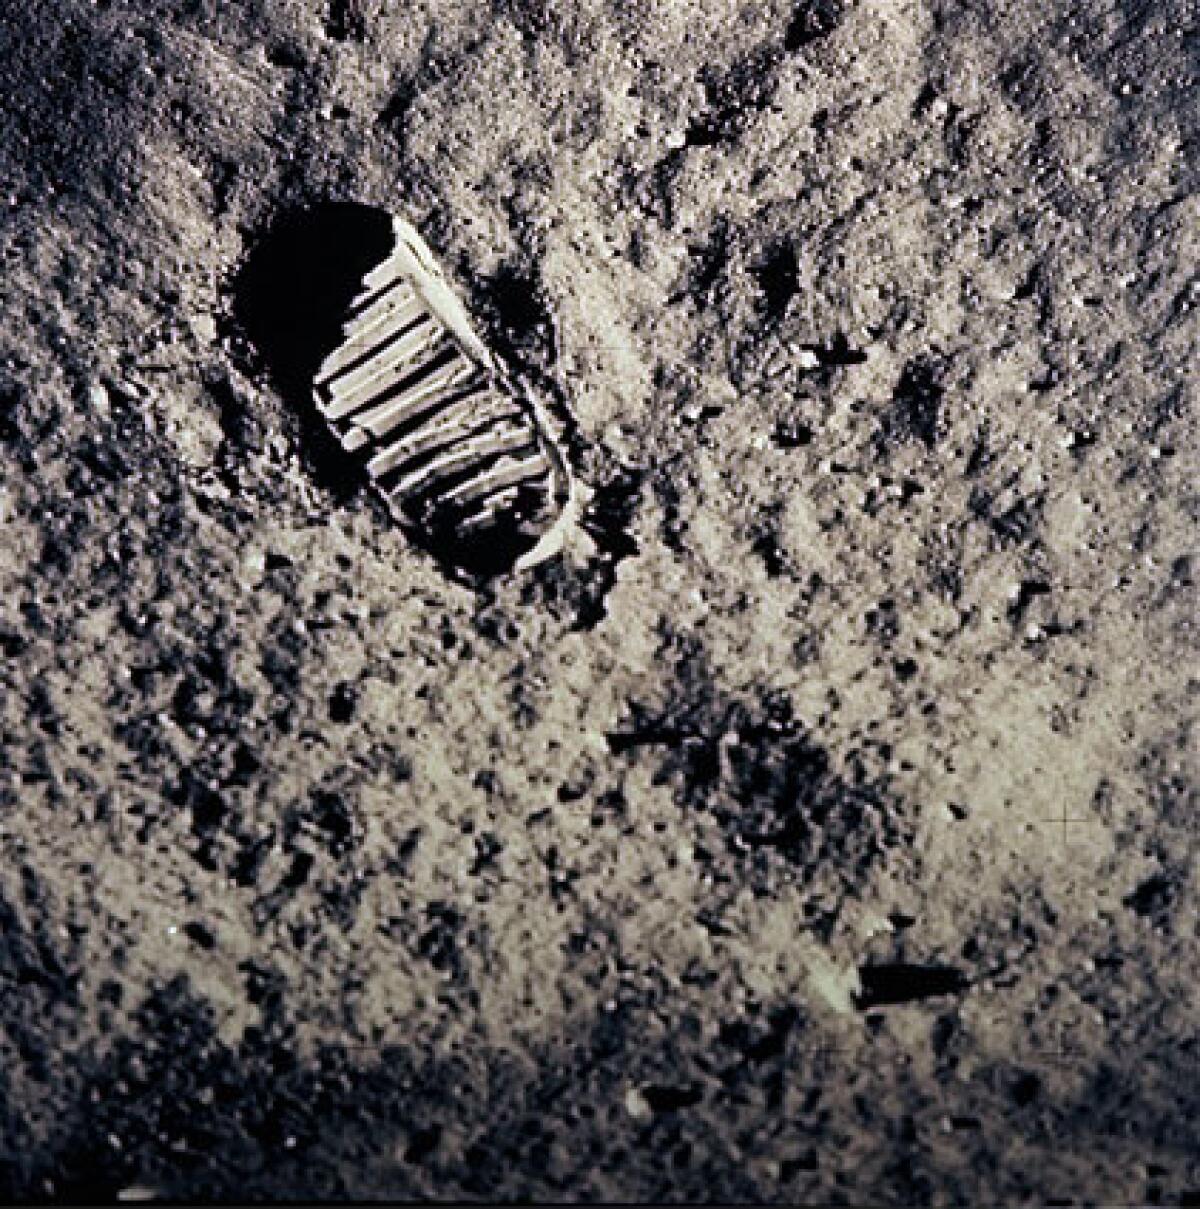 A boot print marks the lunar surface. The next time NASA sends astronauts to the moon, one will be a woman.